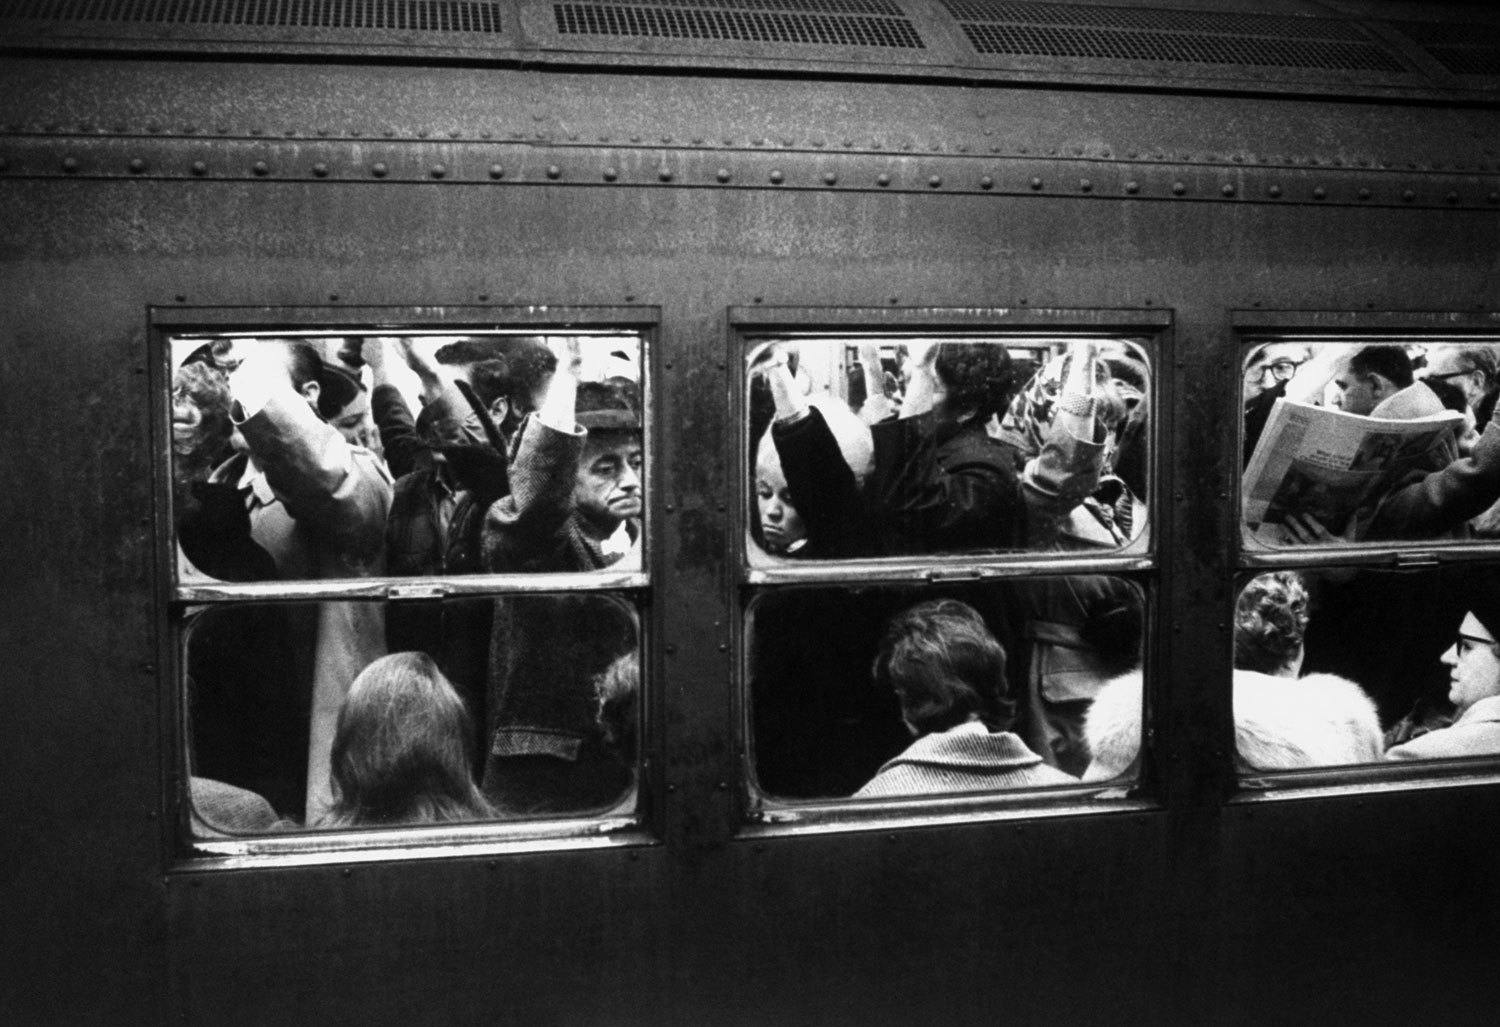 Crowed commuters on a train during rush hour on Manhattan's IRT subway in January 1970.